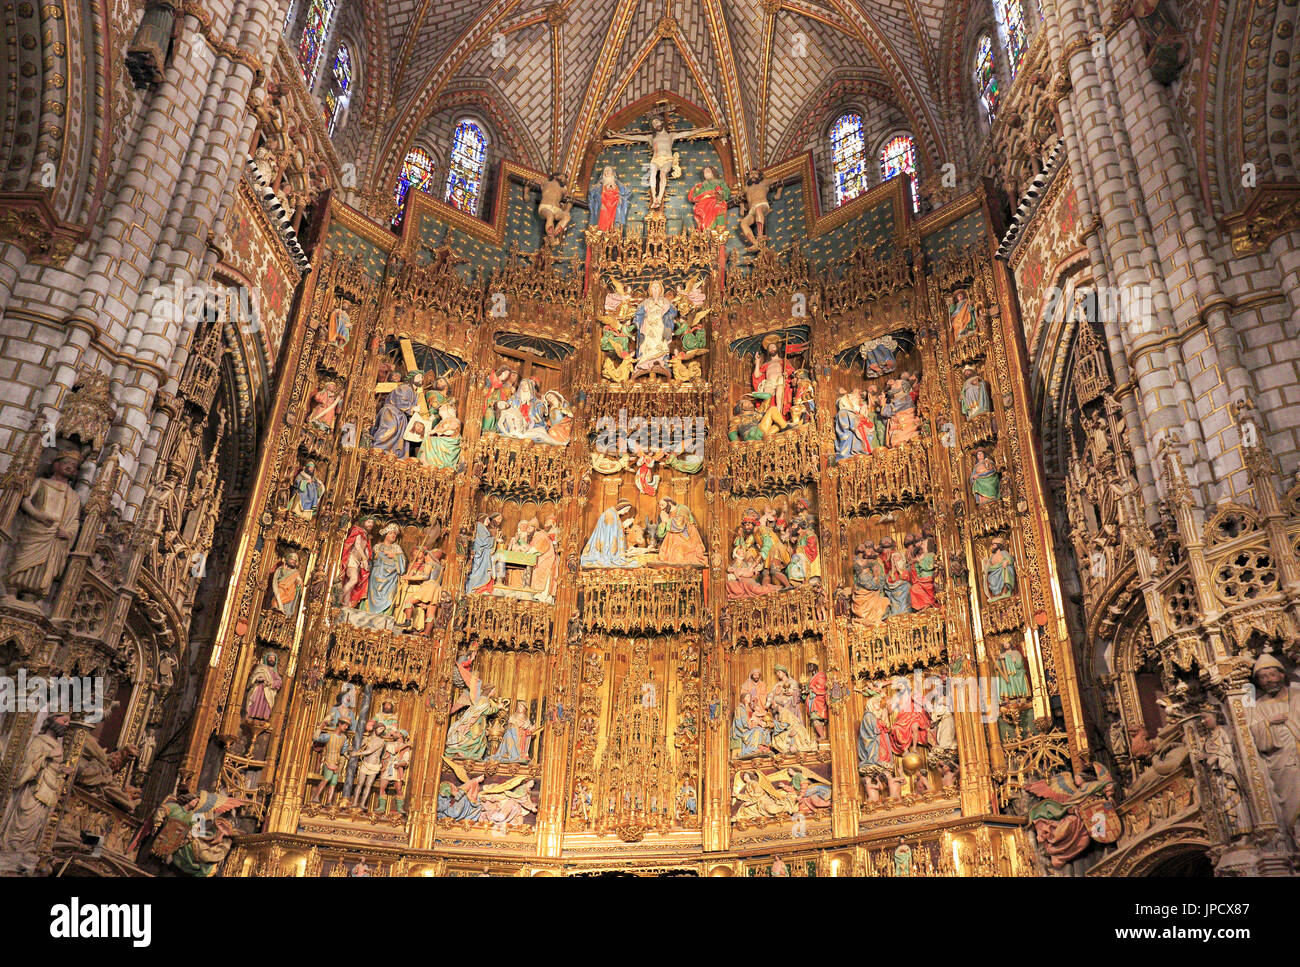 The Main altar in the interior of the Primate Cathedral of Saint Mary of Toledo, a Roman Catholic 13th-century High Gothic UNESCO cathedral. Stock Photo